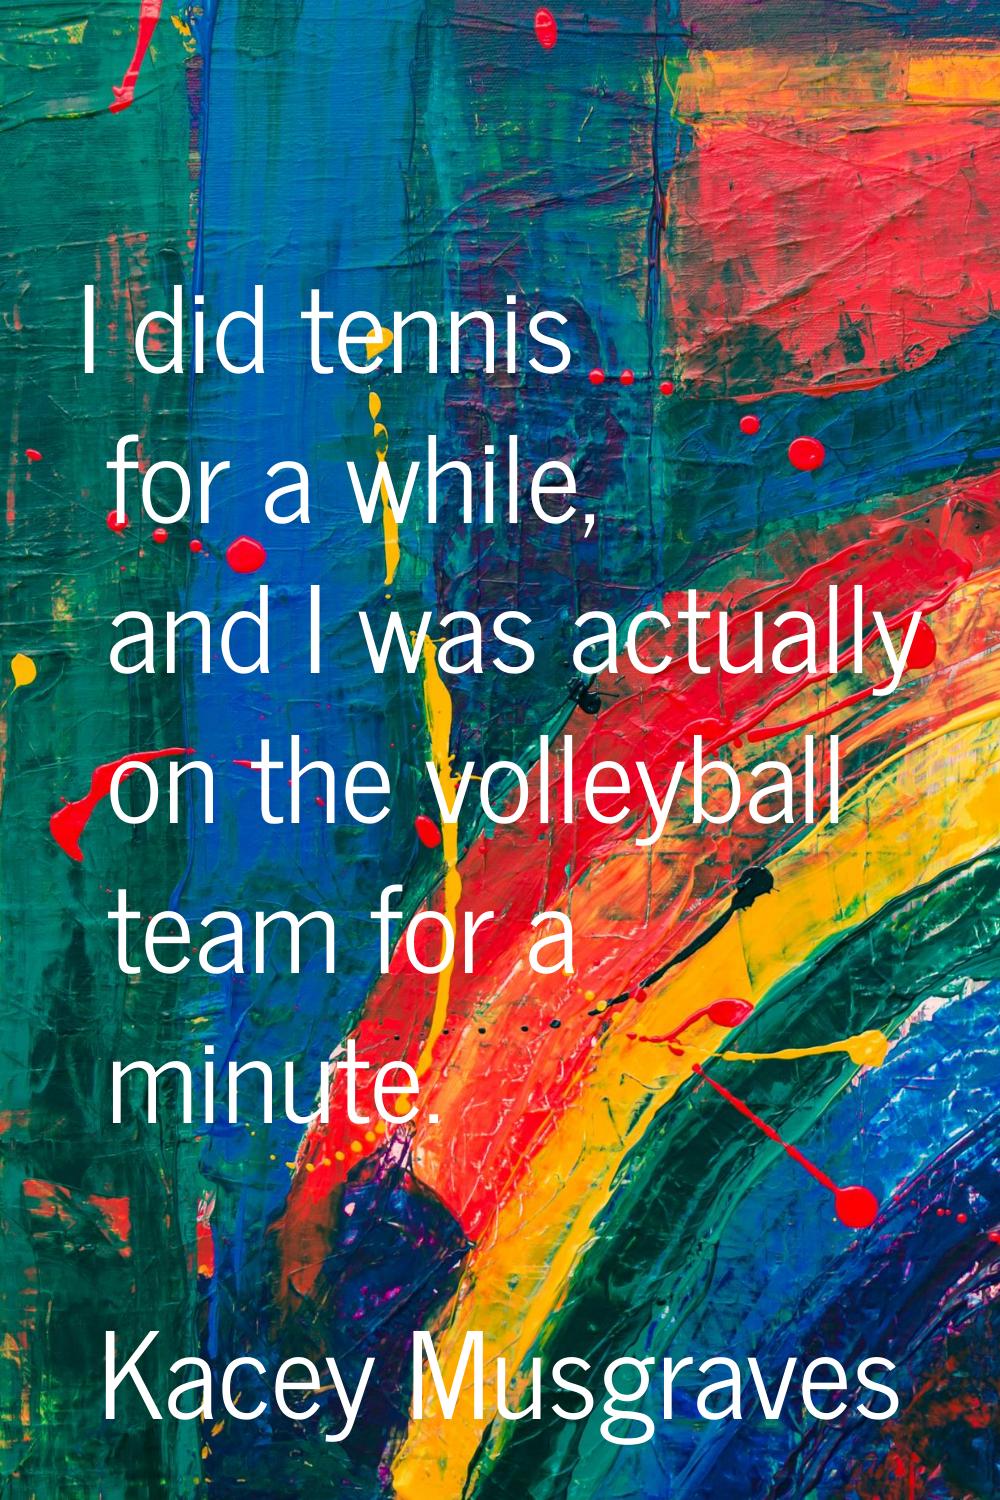 I did tennis for a while, and I was actually on the volleyball team for a minute.